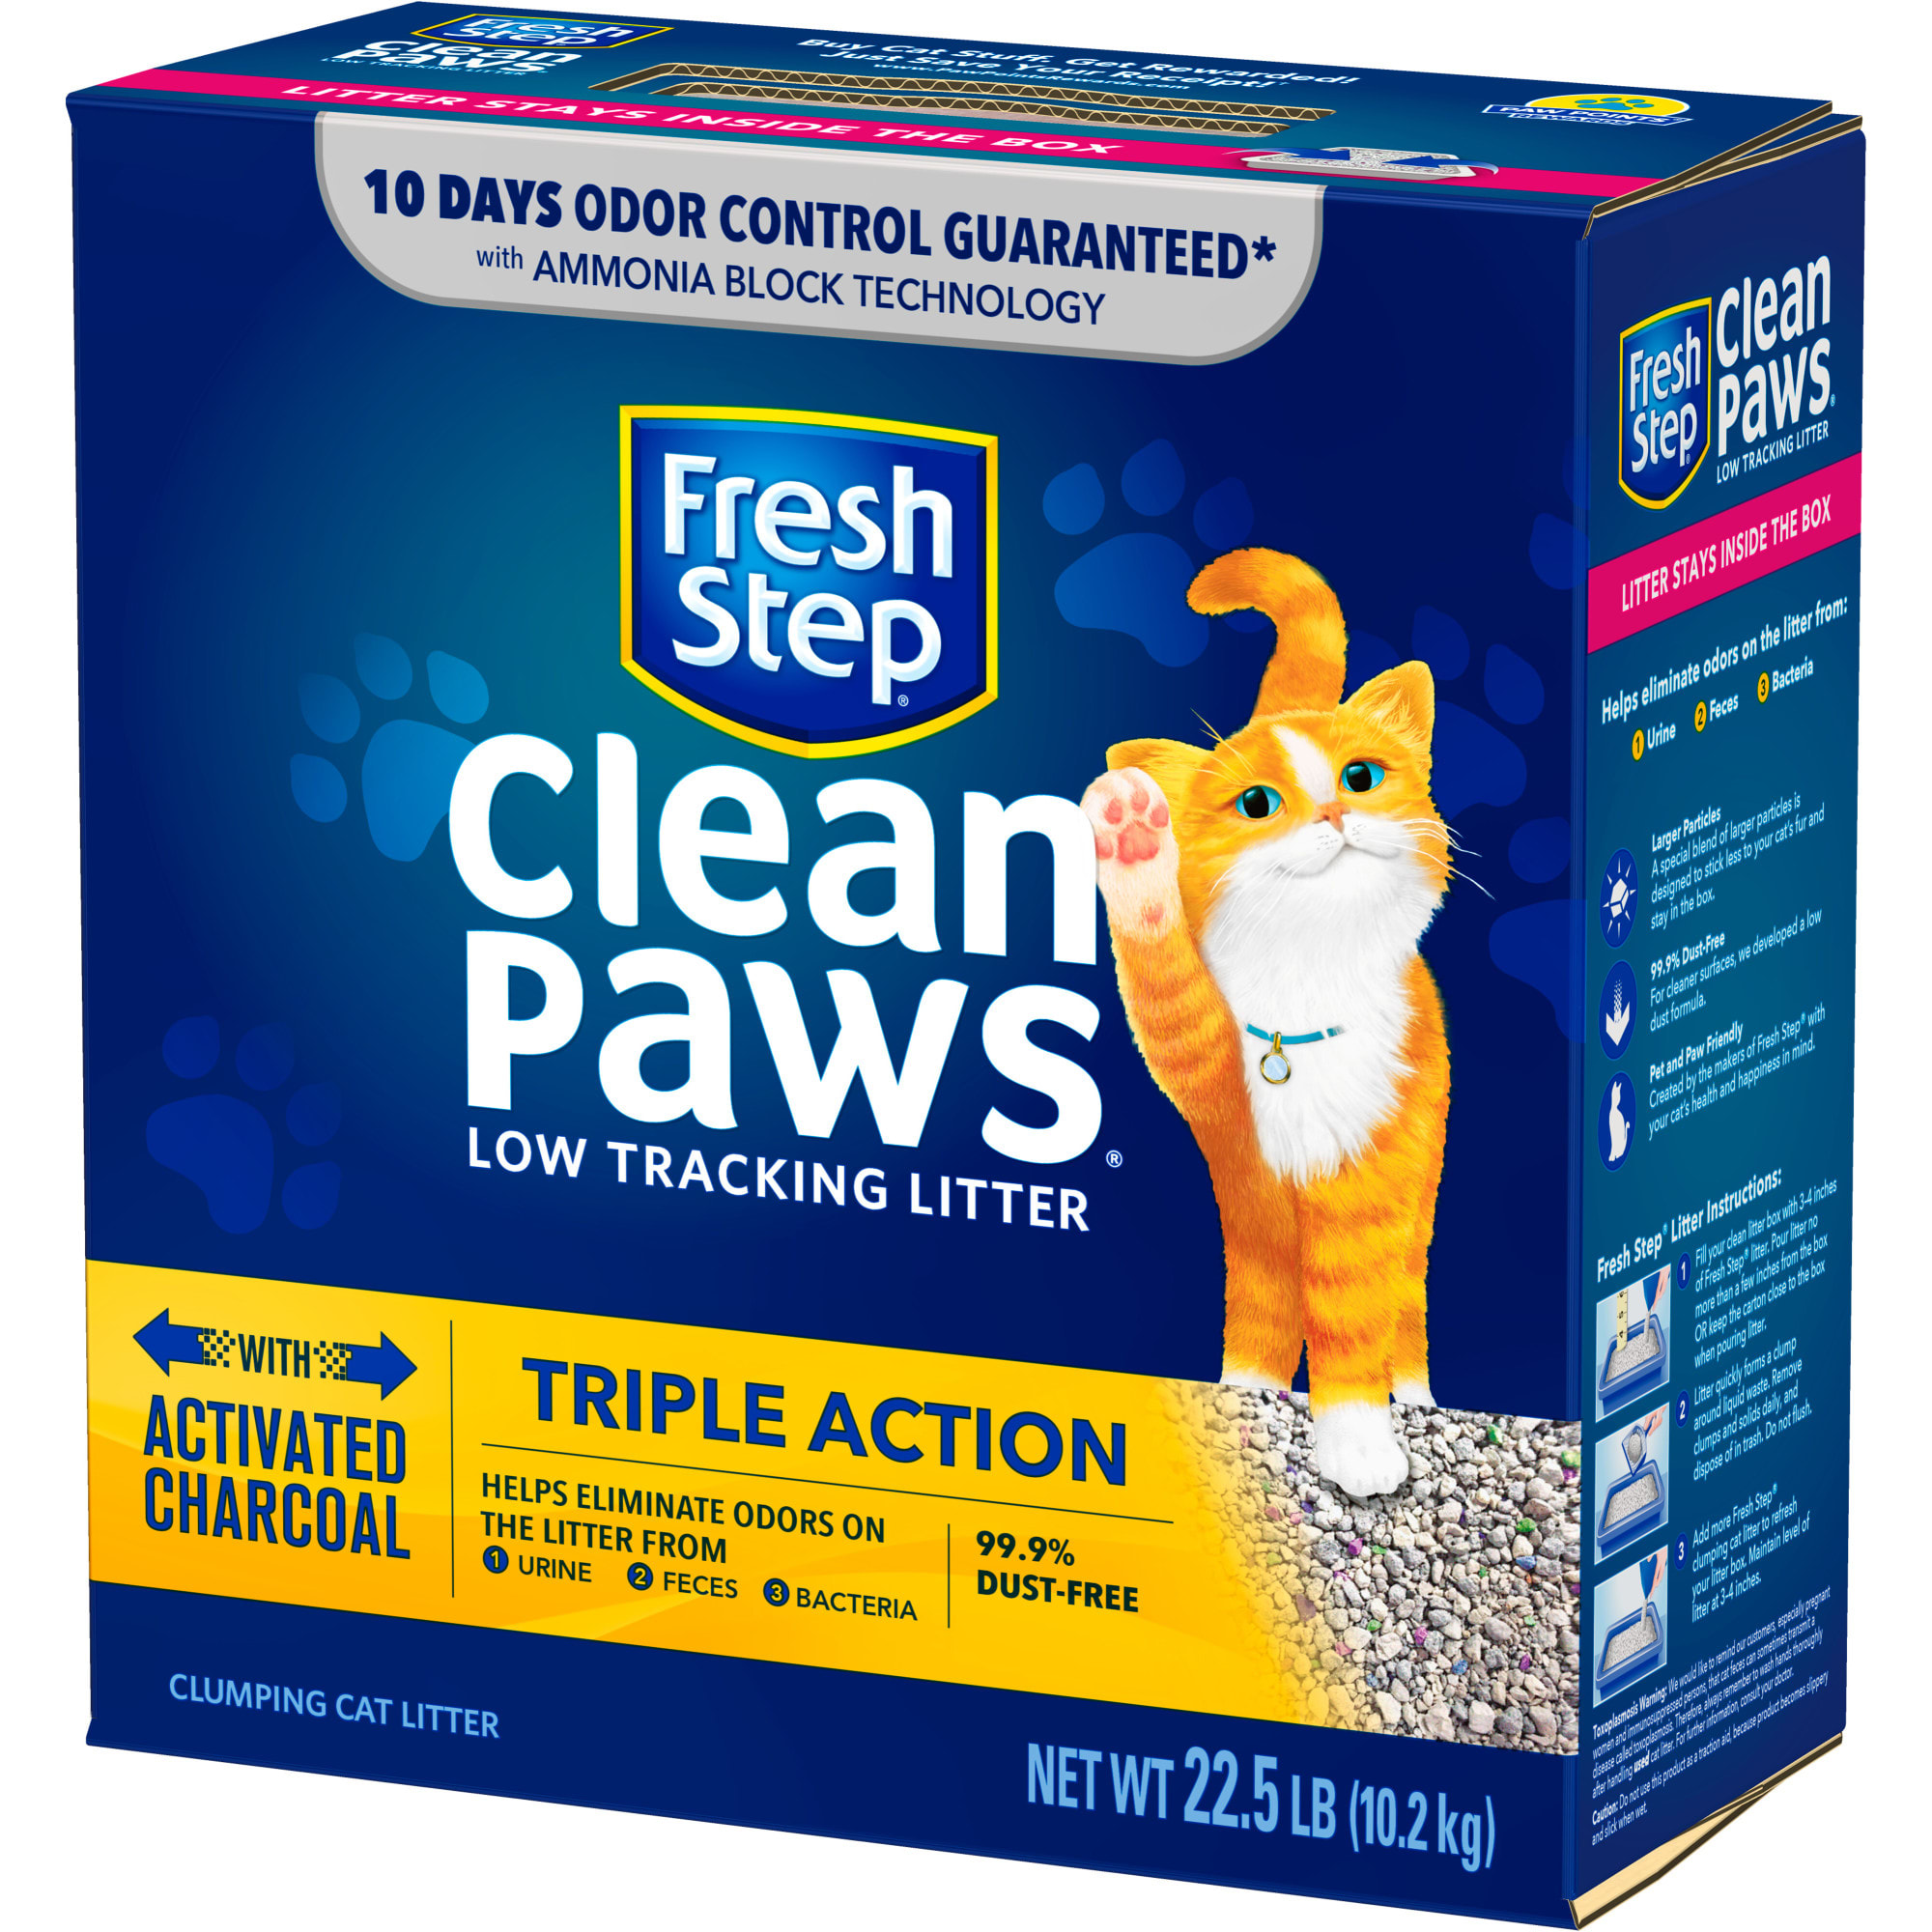 Fresh Step - Fresh Step Clean Paws Calm Scent Clumping Cat Litter 22.5  Liters (22.50 pounds)